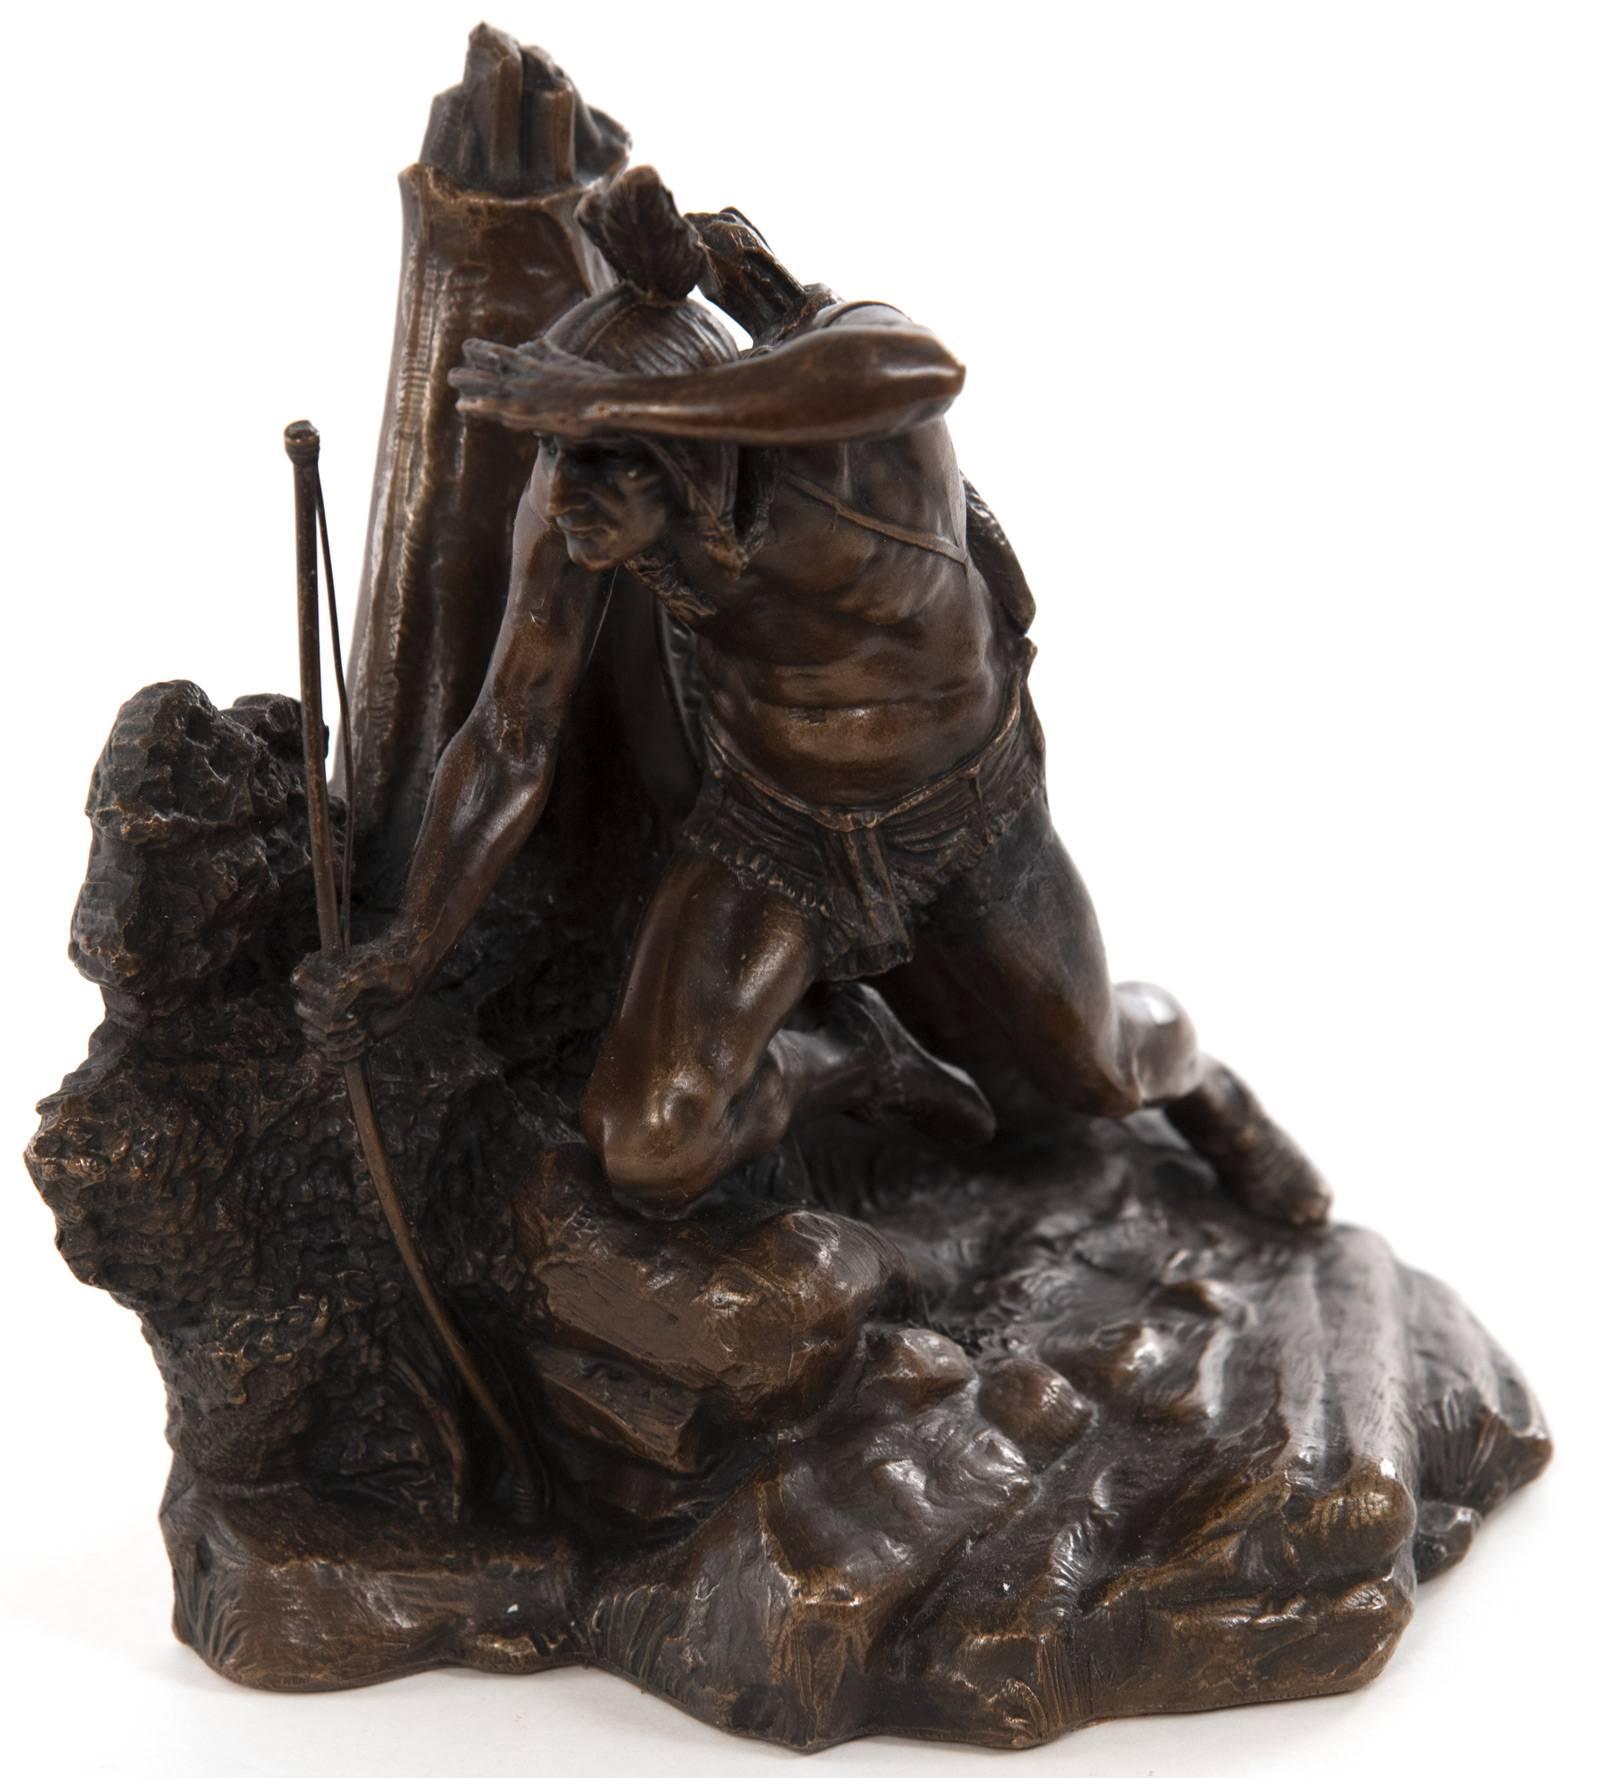 In this pair of figural bookends, an Indian, holding a bow and bowstring, shades his eyes while peering into the distance, one knee resting on a mound and his shield hanging behind him, from his teepee.
Though this pair is unmarked they are